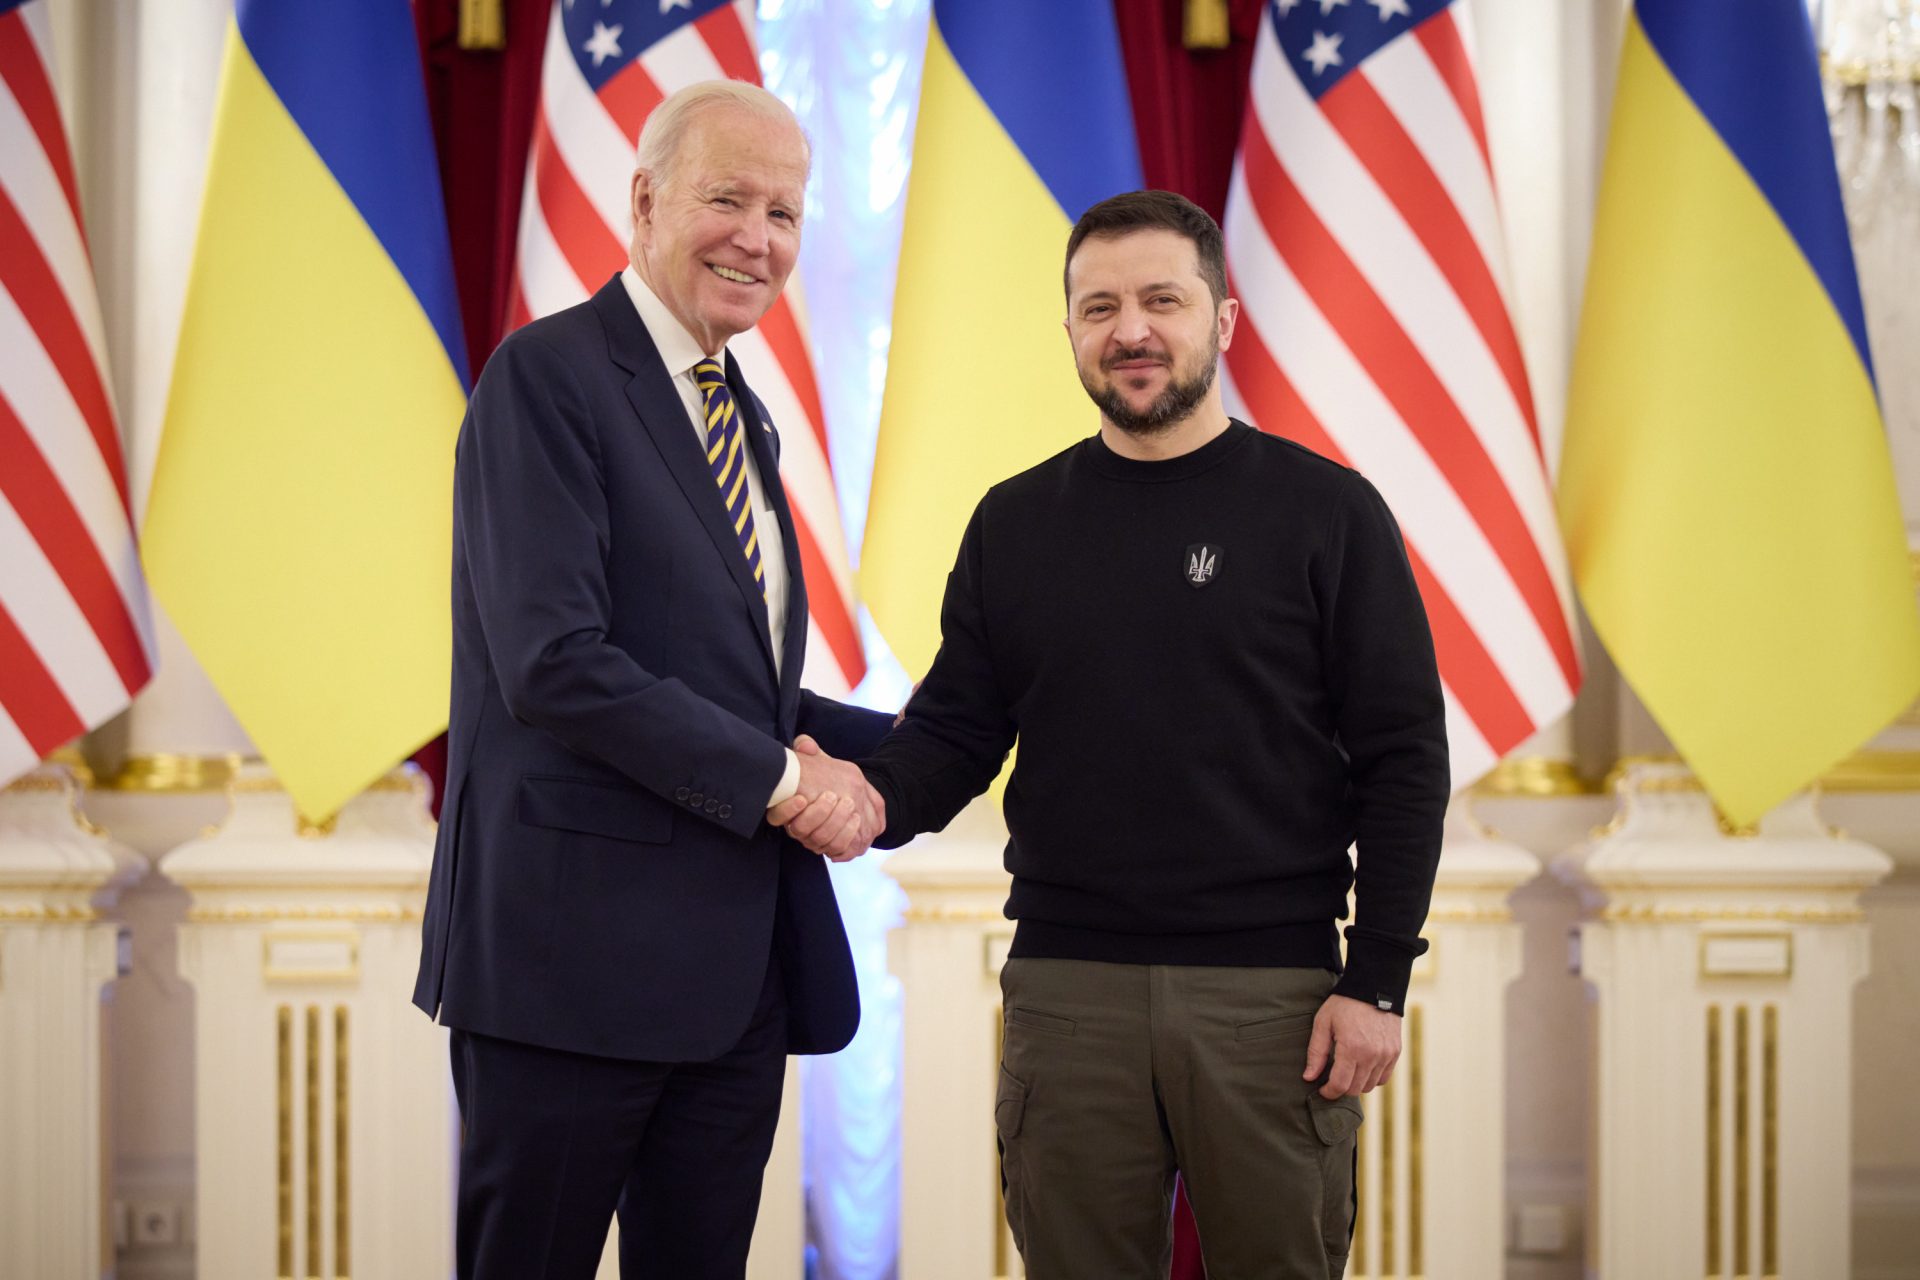 <p>It's been just over a year since Joe Biden made a surprise visit to war-torn Ukraine but his trip is worth remembering since it was the first time an American President visited an active warzone in decades.</p>